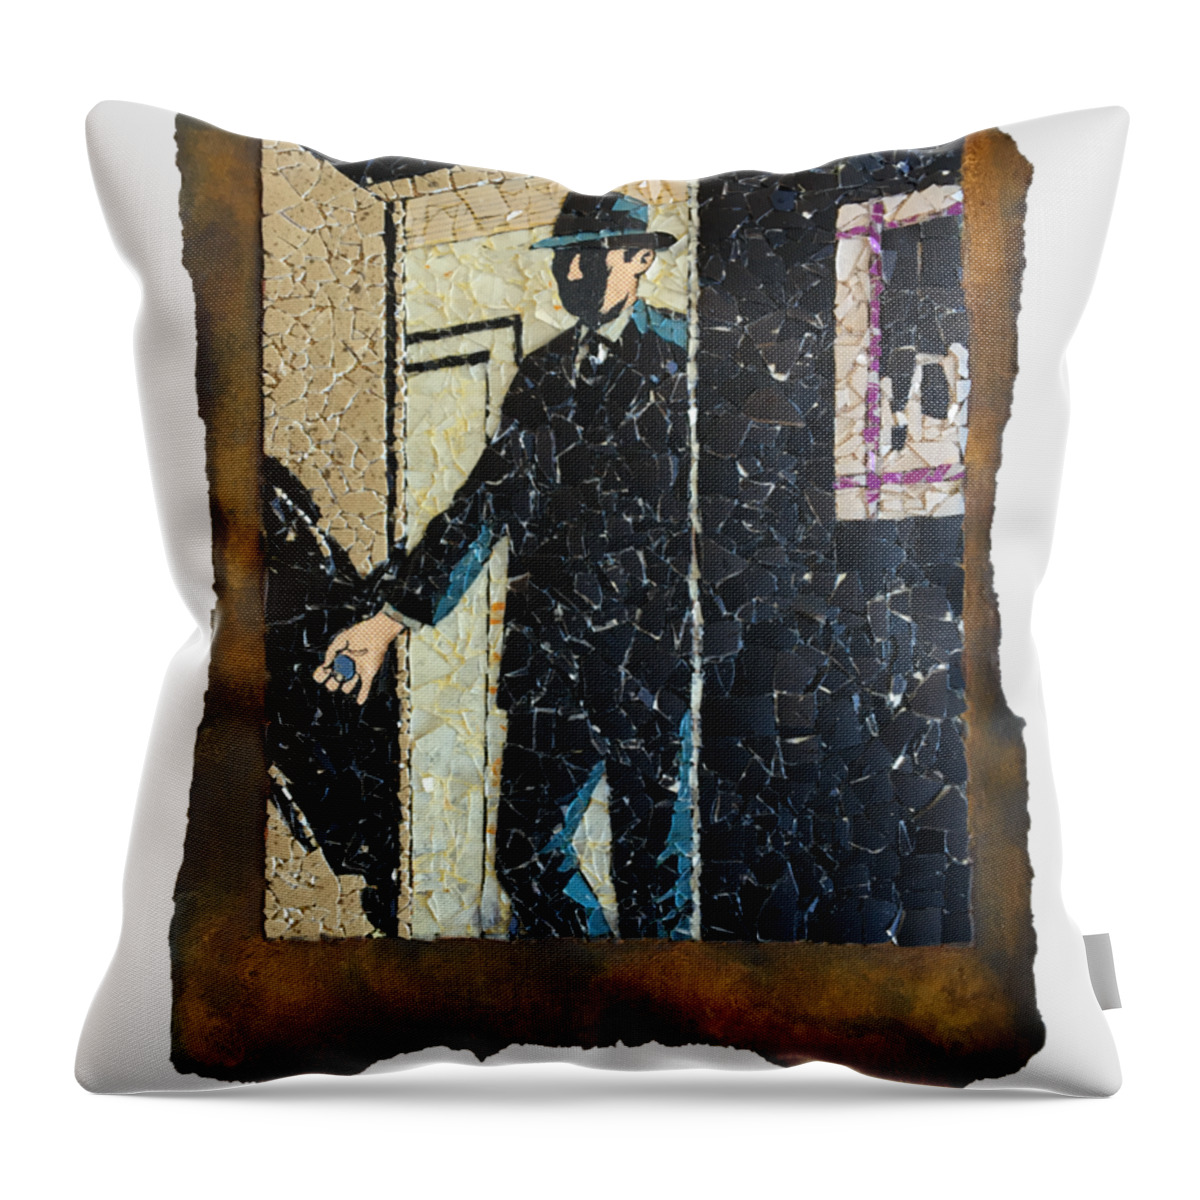 Glass Throw Pillow featuring the mixed media Someone Enters Silently by Matthew Lazure